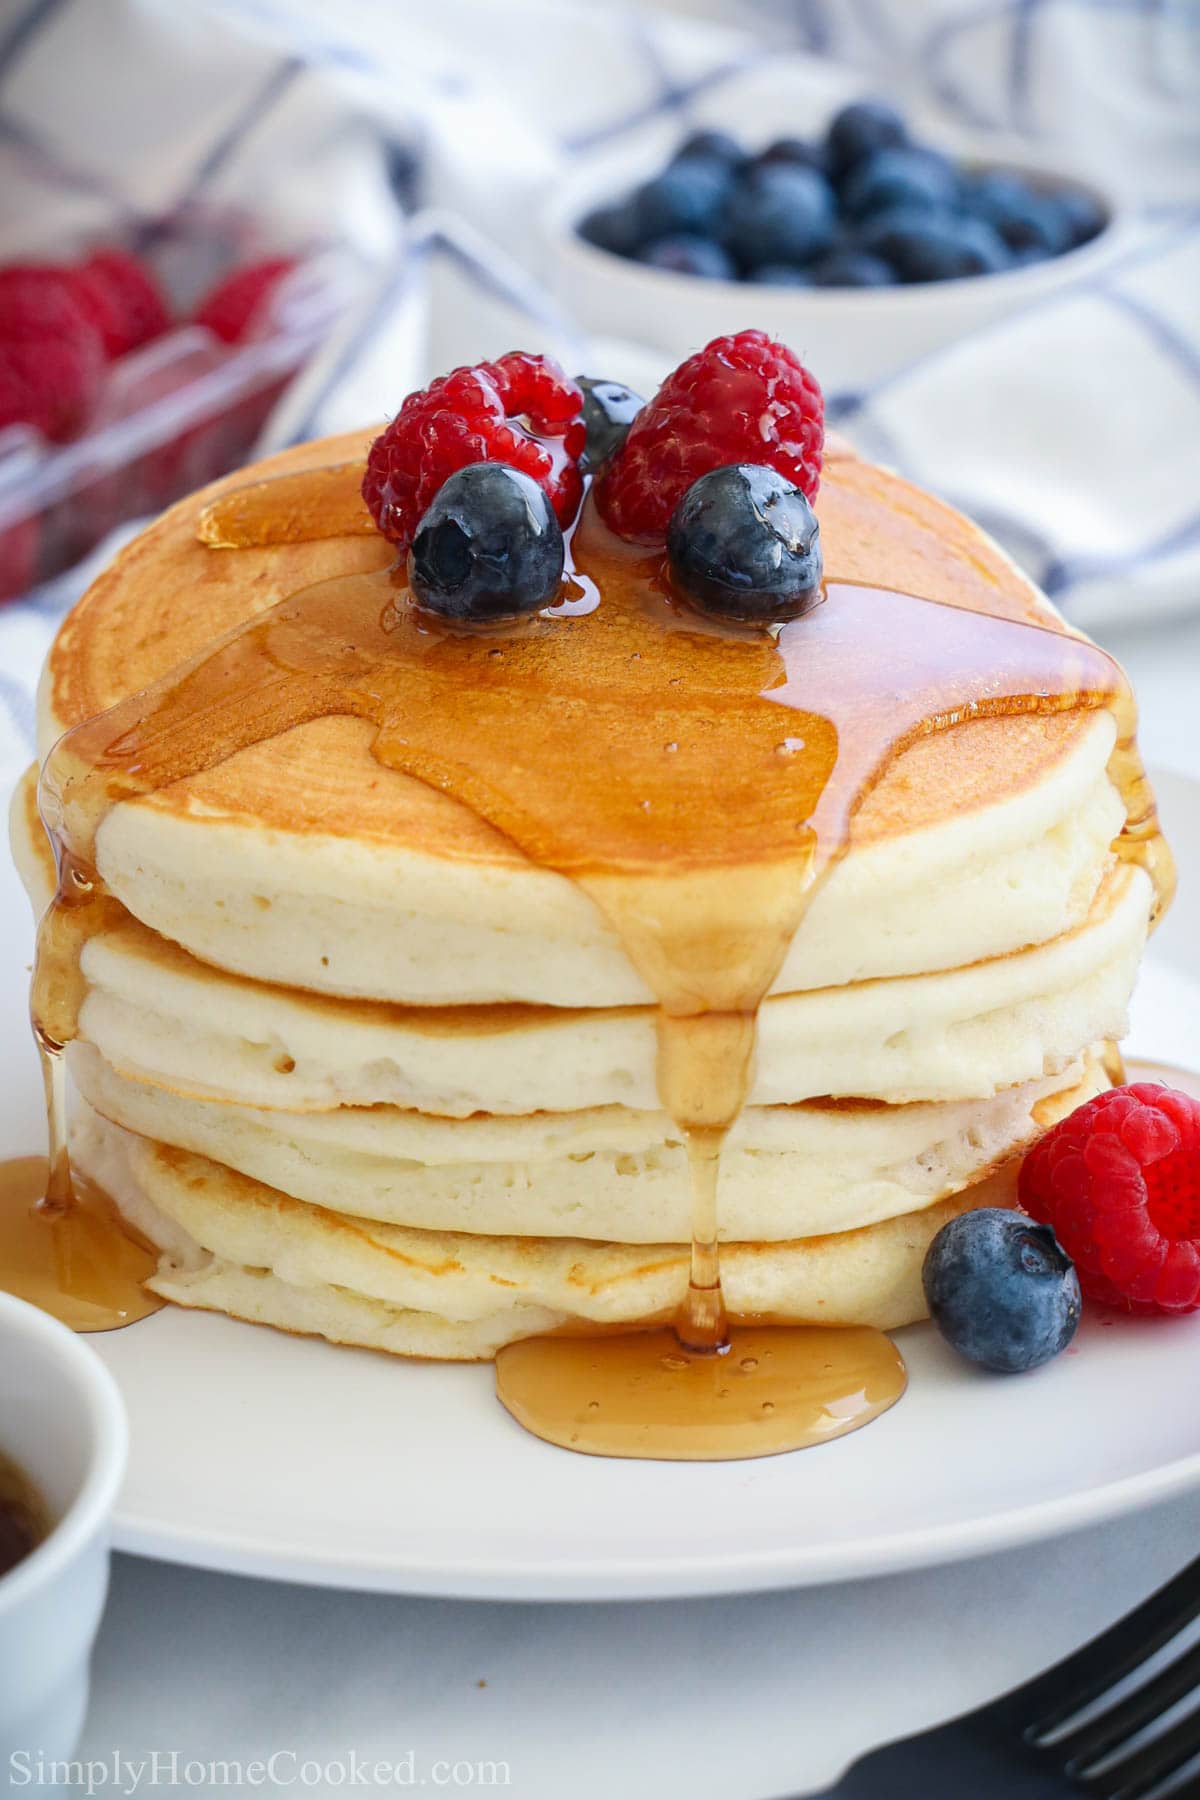 Buttermilk Pancakes - Simply Home Cooked